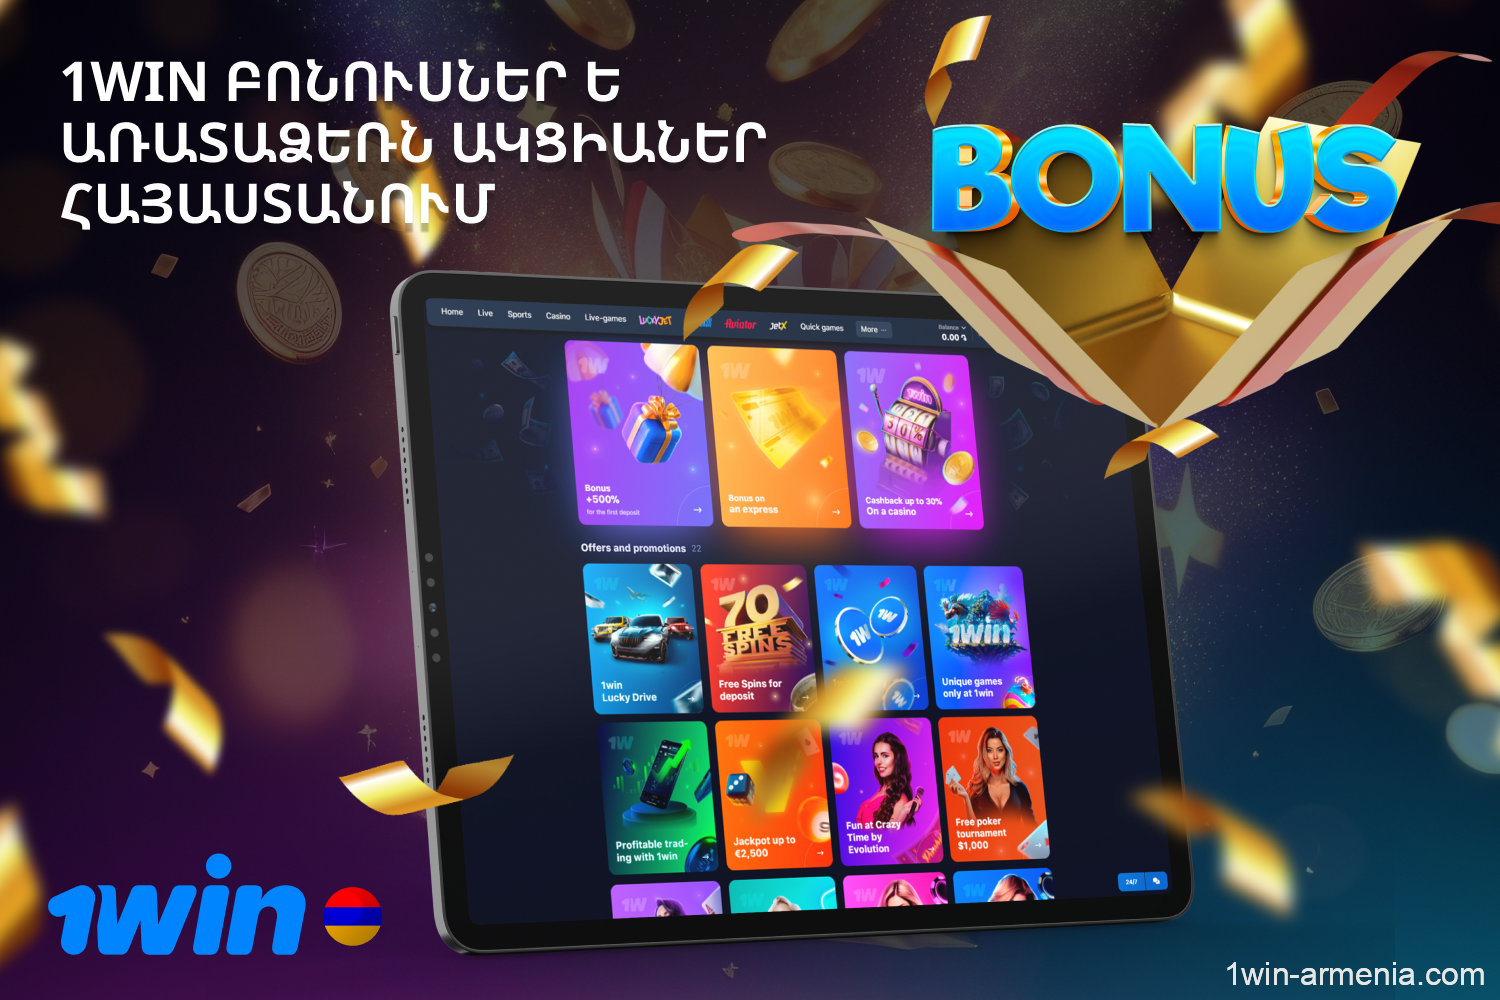 1win offers various promotions and nice bonuses for beginners and regular players from Armenia